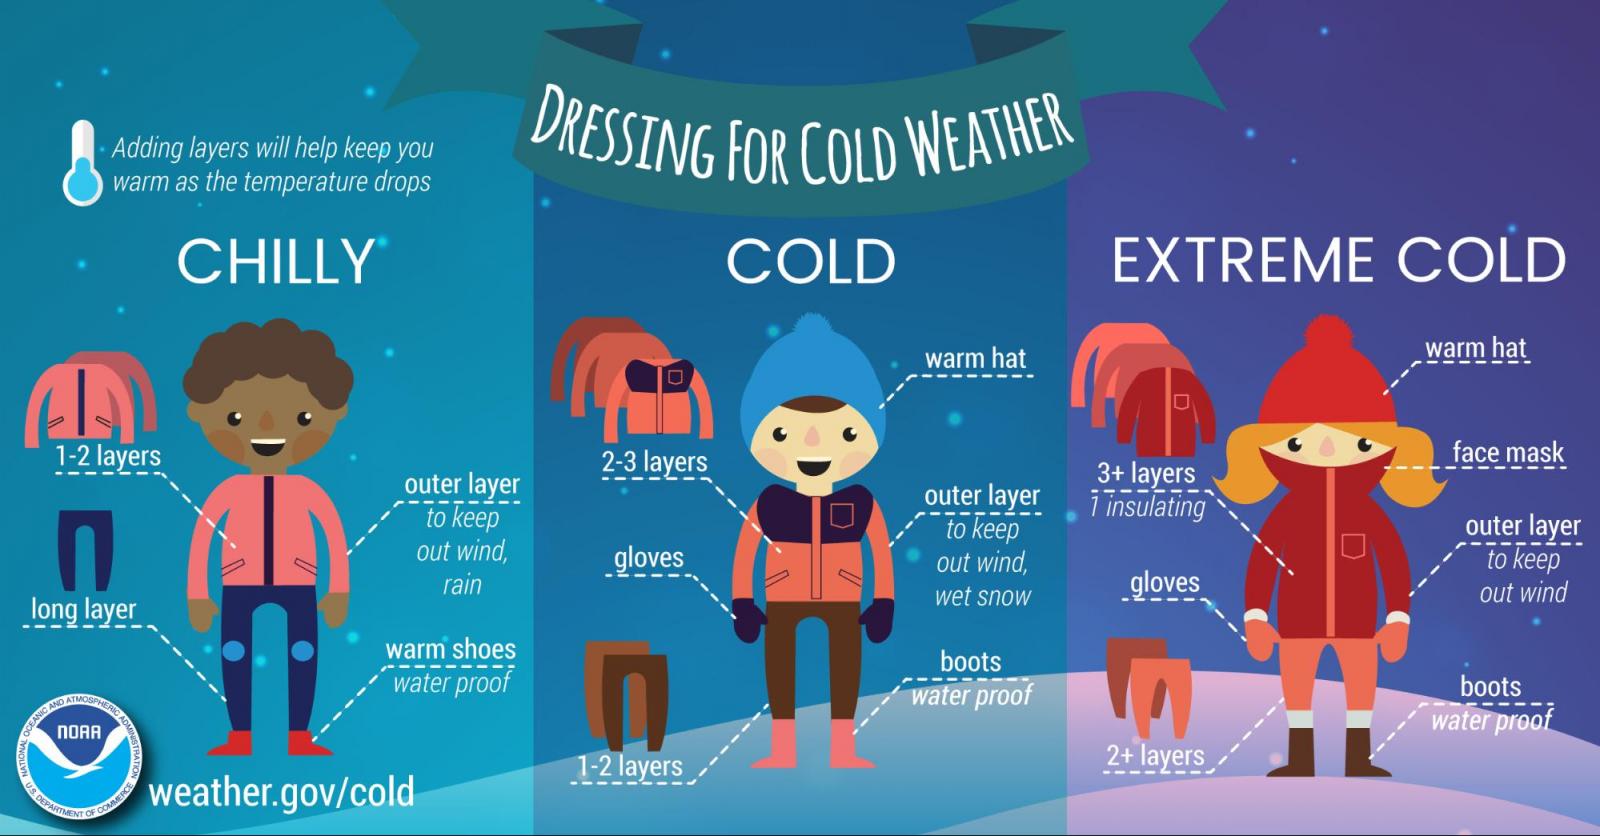 Dressing for the Cold - Infographic. Adding layers will help keep you warm as the temperature drops. Chilly: 1-2 layers; outer layer to keep out wind, rain; long layer on legs; warm shoes (water proof). Cold: 2-3 layers; warm hat; gloves; outer layer to keep out wind, wet snow; 1-2 long layers on legs; boots (water-proof). Extreme cold: 3+ layers (1 insulating); warm hat; face mask; gloves; outer layer to keep out wind; 2+ long layers on legs; boots (water proof).